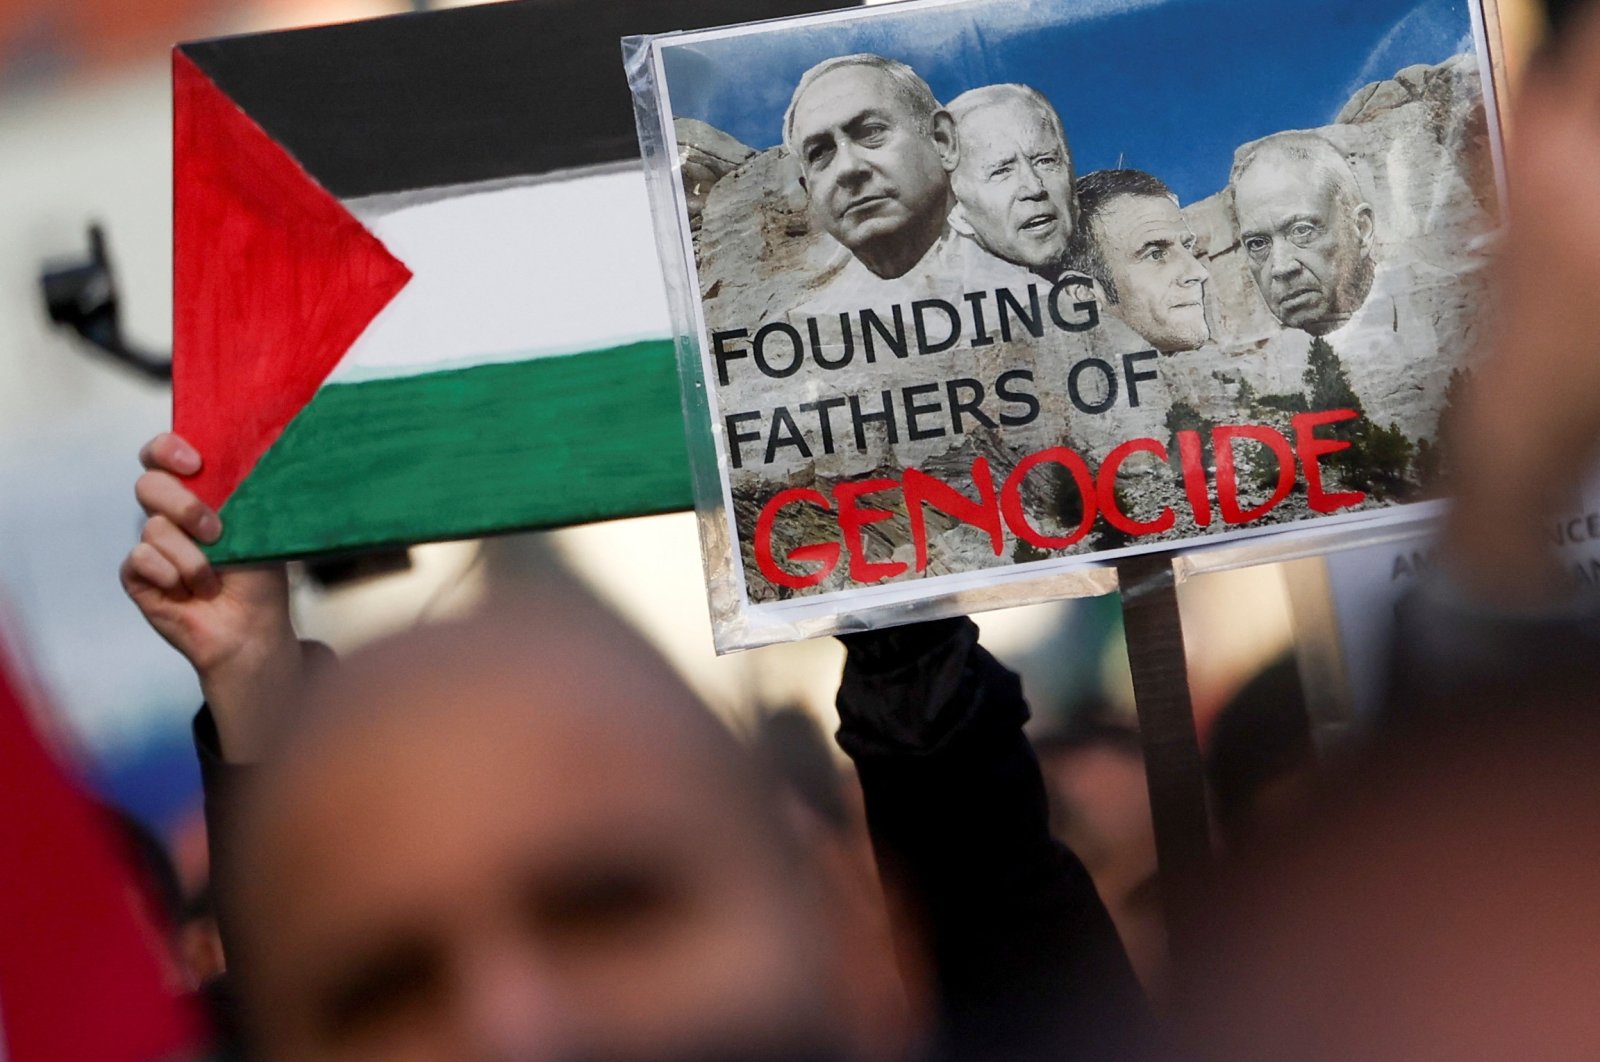 A demonstrator holds a placard depicting Israeli Prime Minister Benjamin Netanyahu (L), U.S. President Joe Biden (C), French President Emmanuel Macron (C-2) and Israeli Defense Minister Yoav Gallant (R) during a protest in support of Palestinians in Gaza, Brussels, Belgium, Nov. 11, 2023. (Reuters Photo)